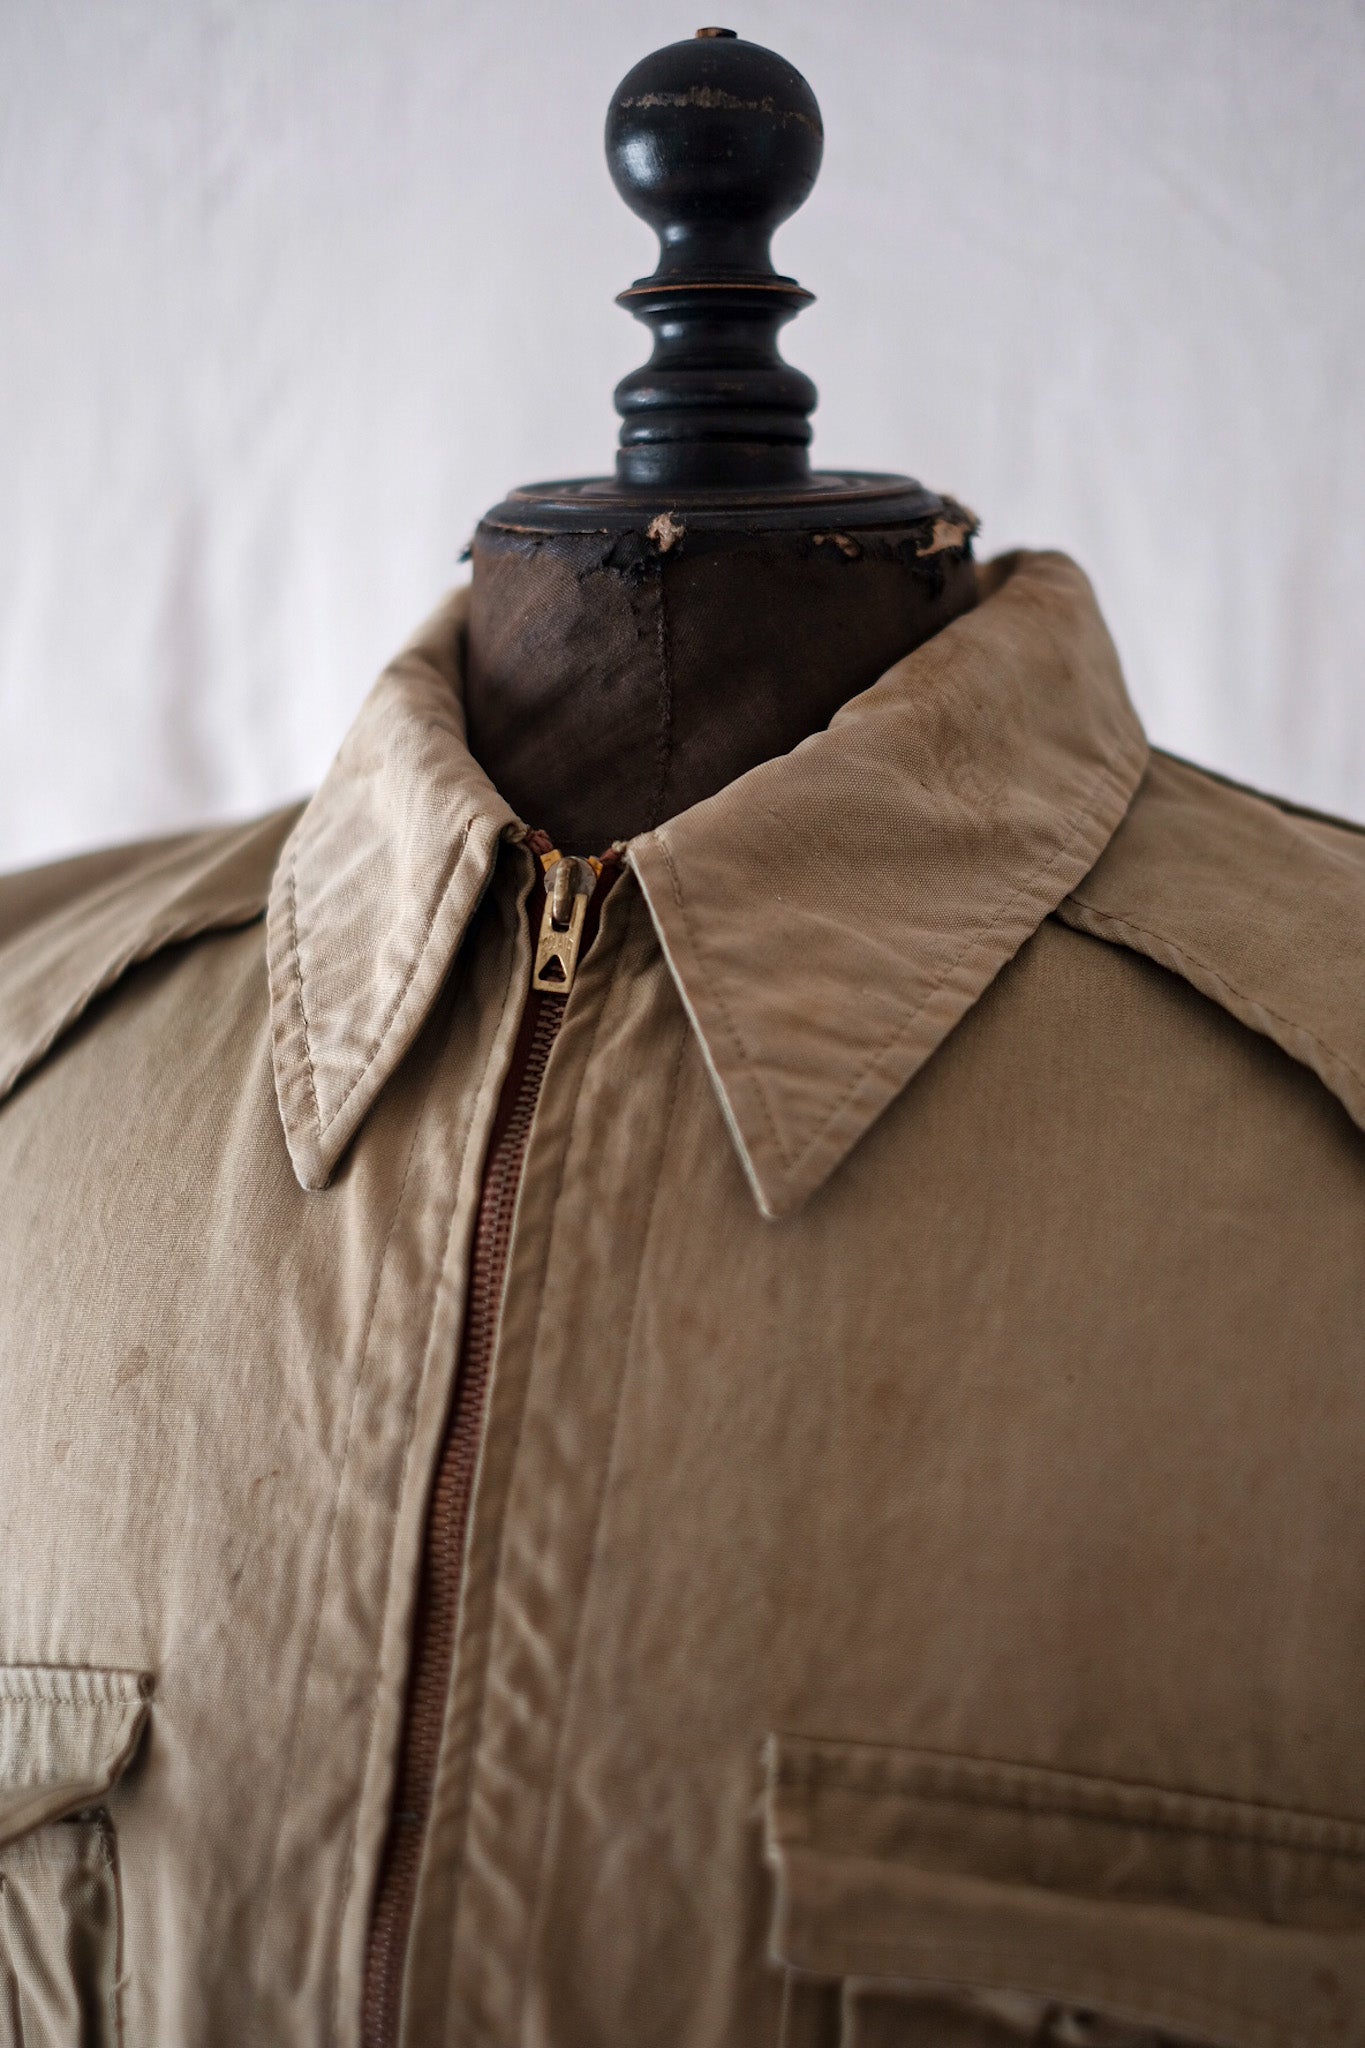 [~ 50's] French Vintage Cotton Canvas Hunting Jacket